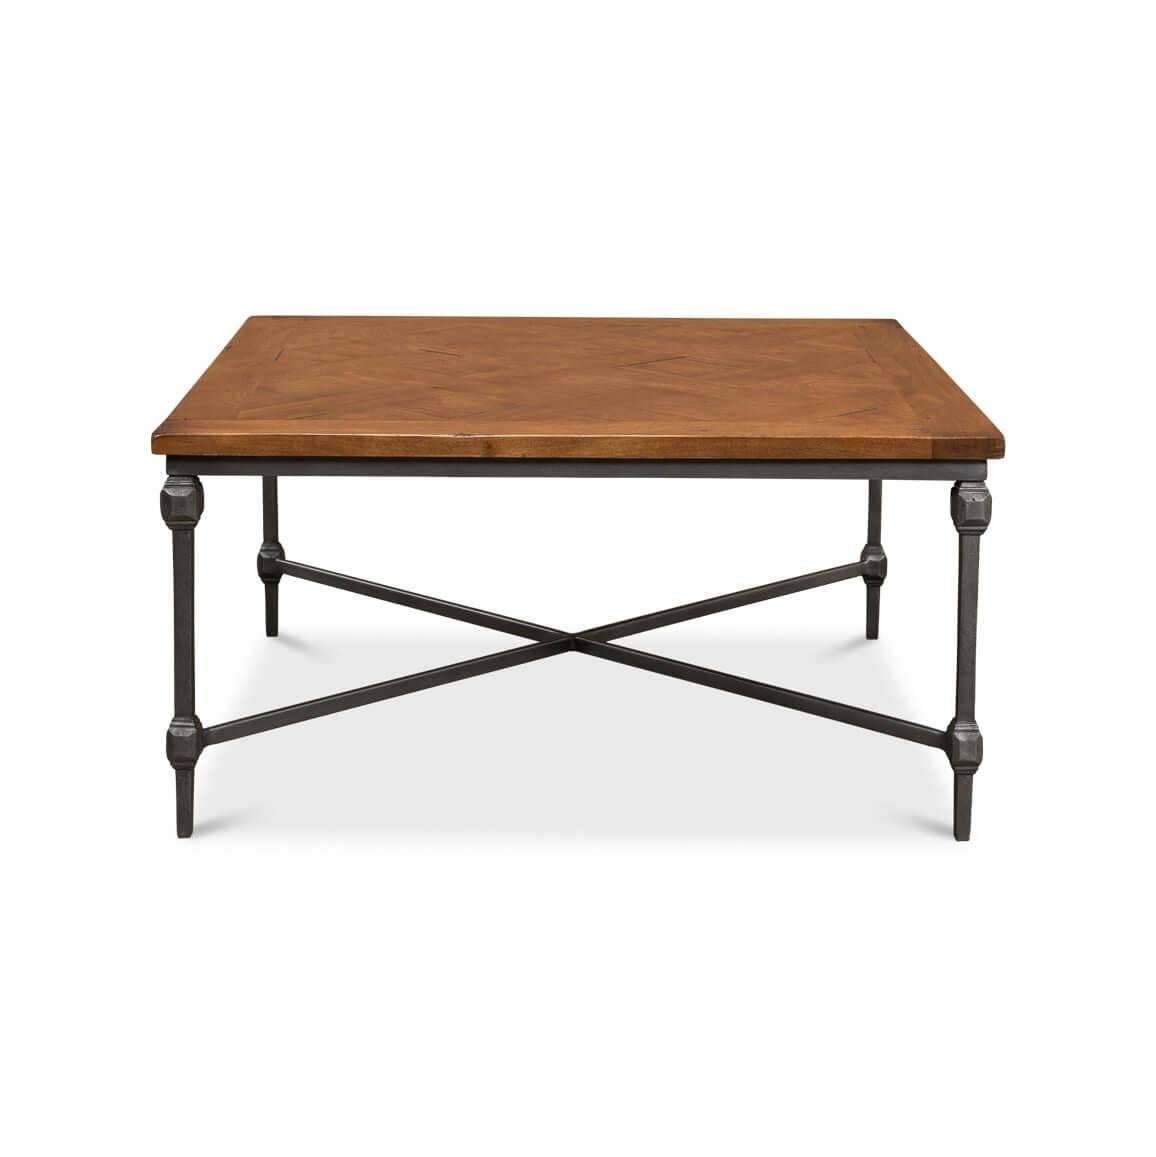 A fusion of robust metal and warm wood that brings industrial character and European countryside charm to your living area.

The table top, with its parquet inlays, rustic inviting wood grain and rich finish, sits atop a sturdy iron X stretcher